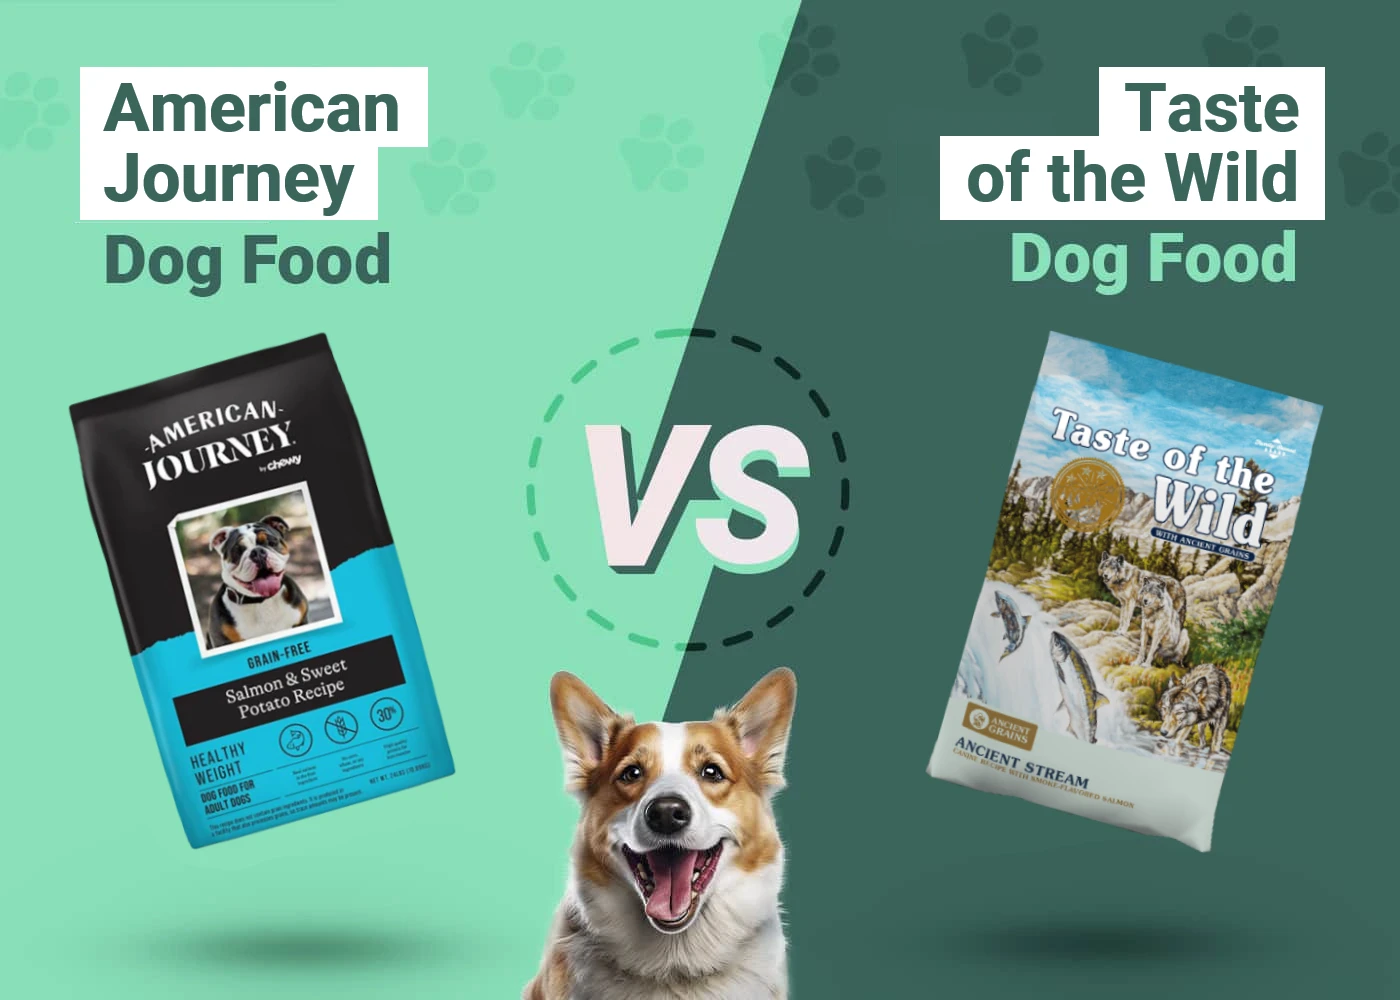 American Journey vs Taste of the Wild - Featured Image